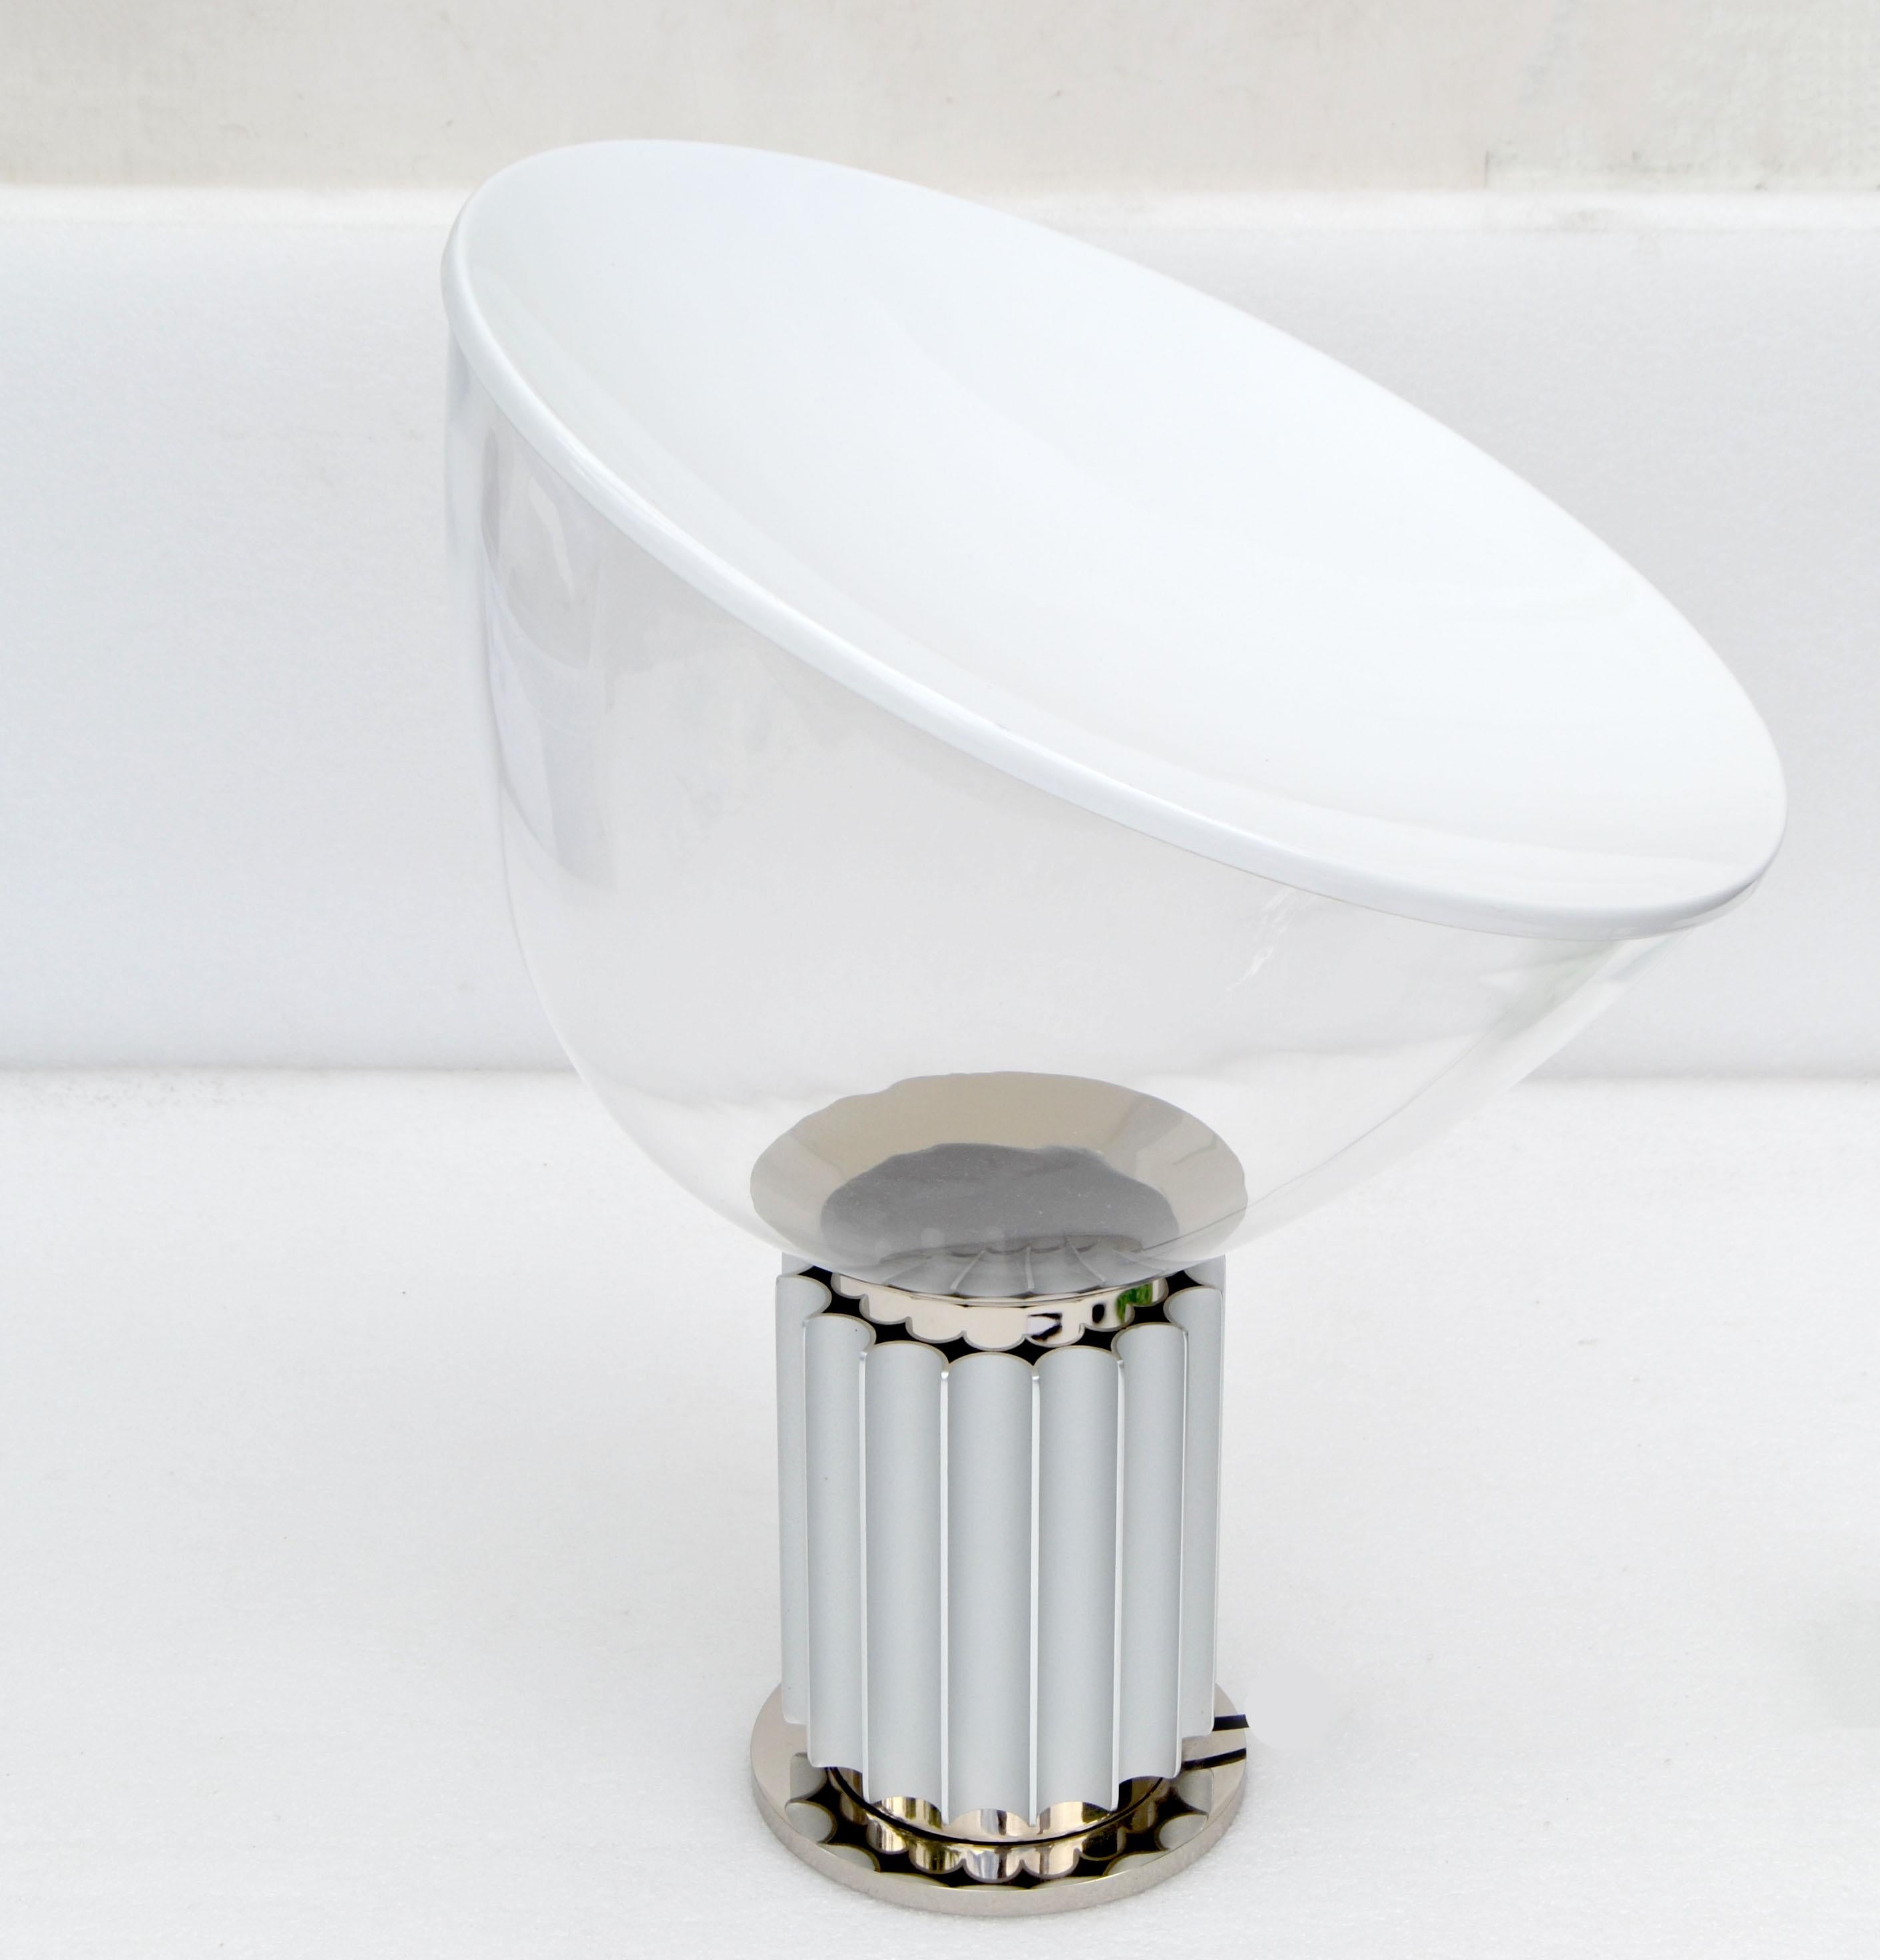 Taccia lamp by Castiglioni Brothers
Base is stainless steel, round glass diffuser shade and white opaline glass top.
In perfect working condition and takes a regular light bulb, LED work too.
Comes with in between cord light switch.
Very heavy